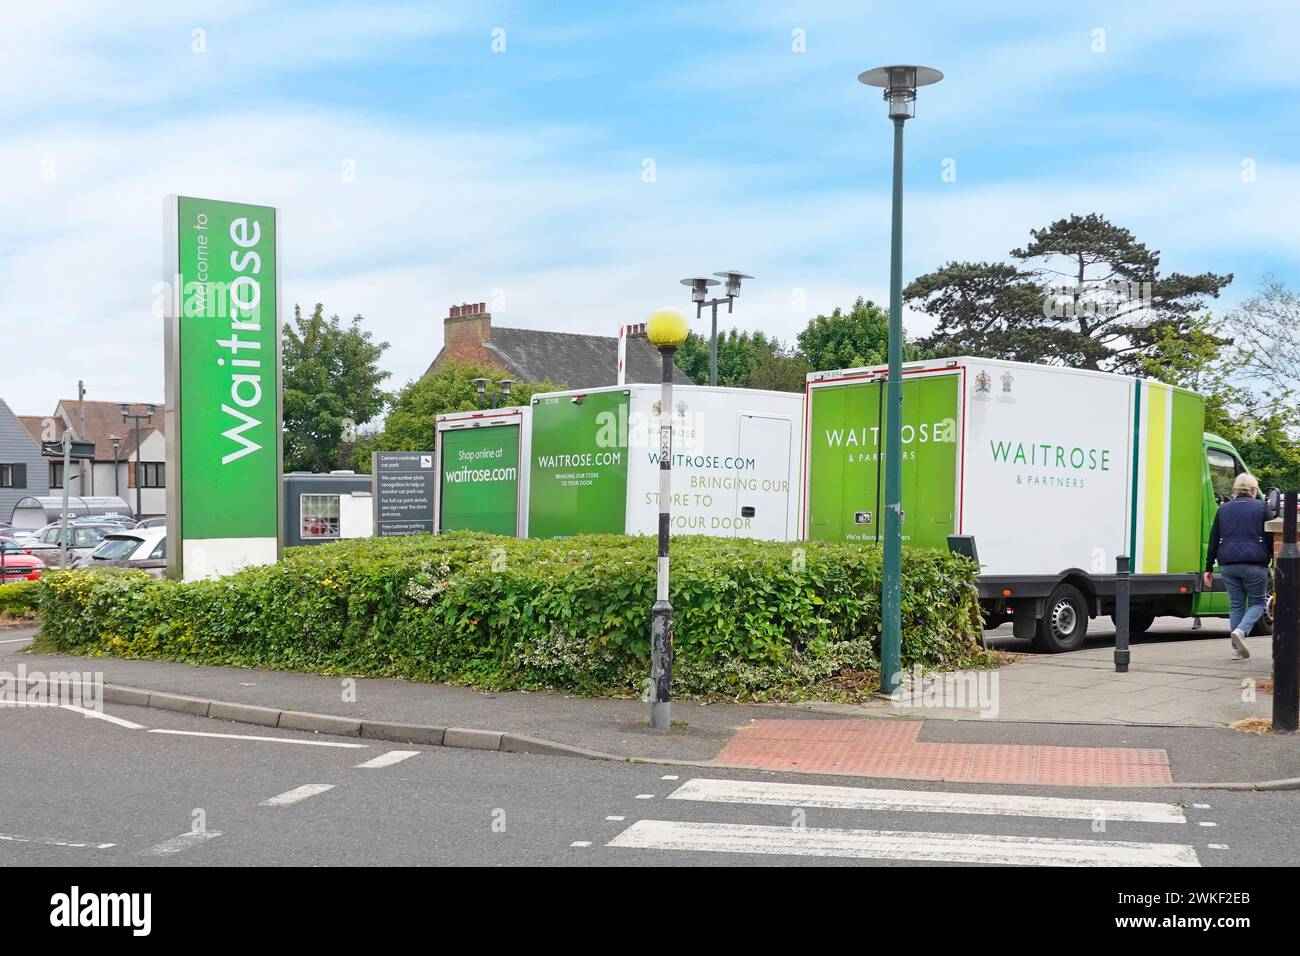 Waitrose supermarket store entrance sign parked delivery vans & customers car park shoppers pedestrian way in from street Billericay Essex England UK Stock Photo